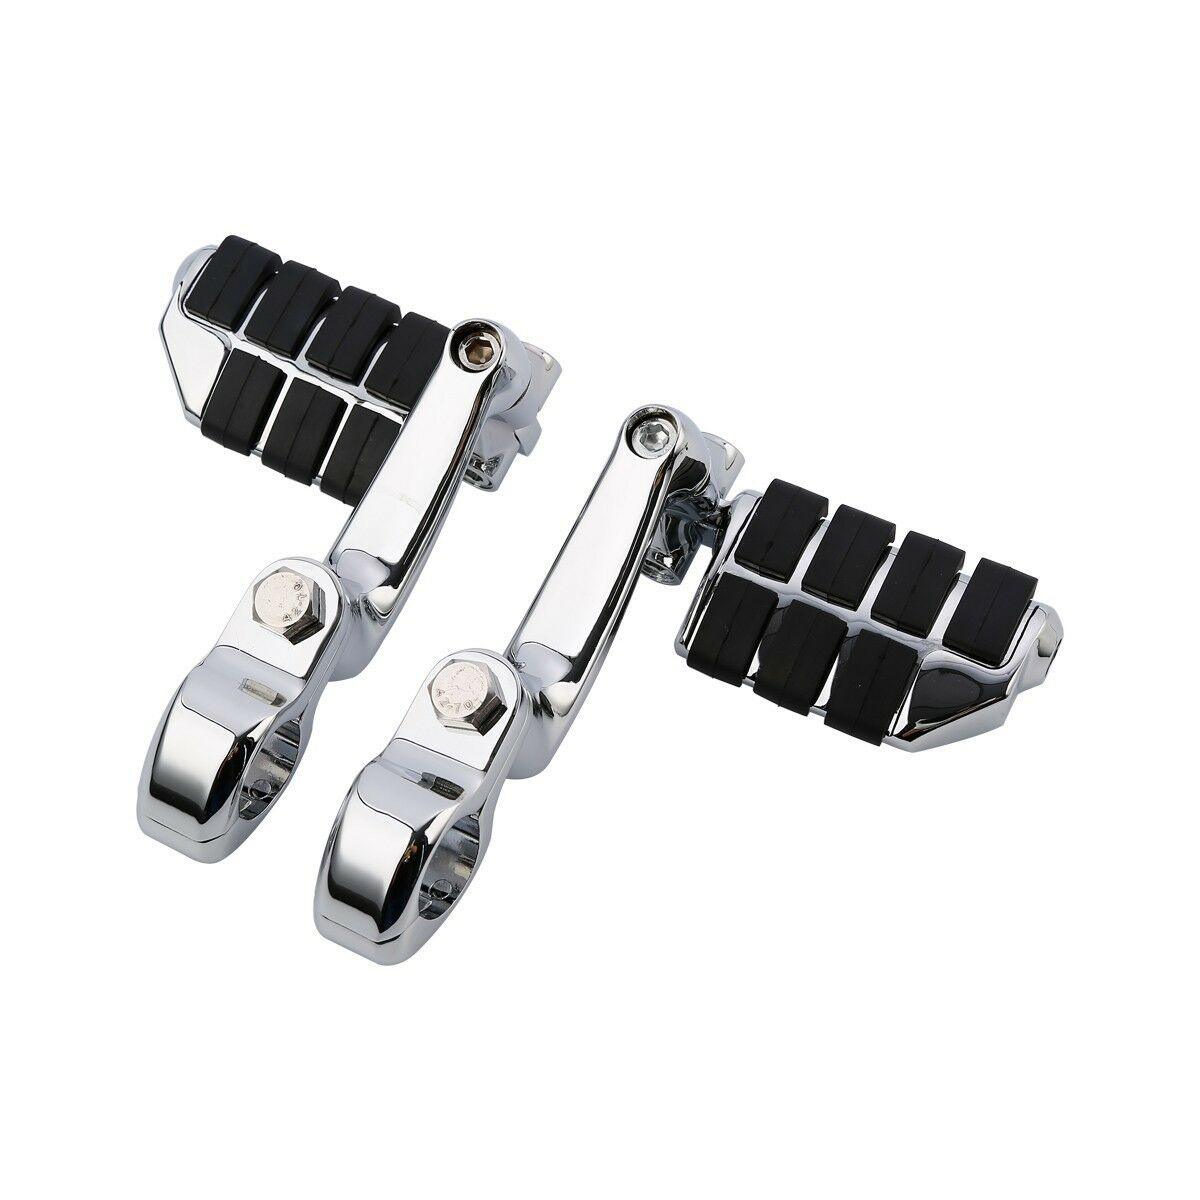 1-1/4" Long Angled Highway Foot Pegs Footrests Chrome Fit For Harley Road Glide - Moto Life Products